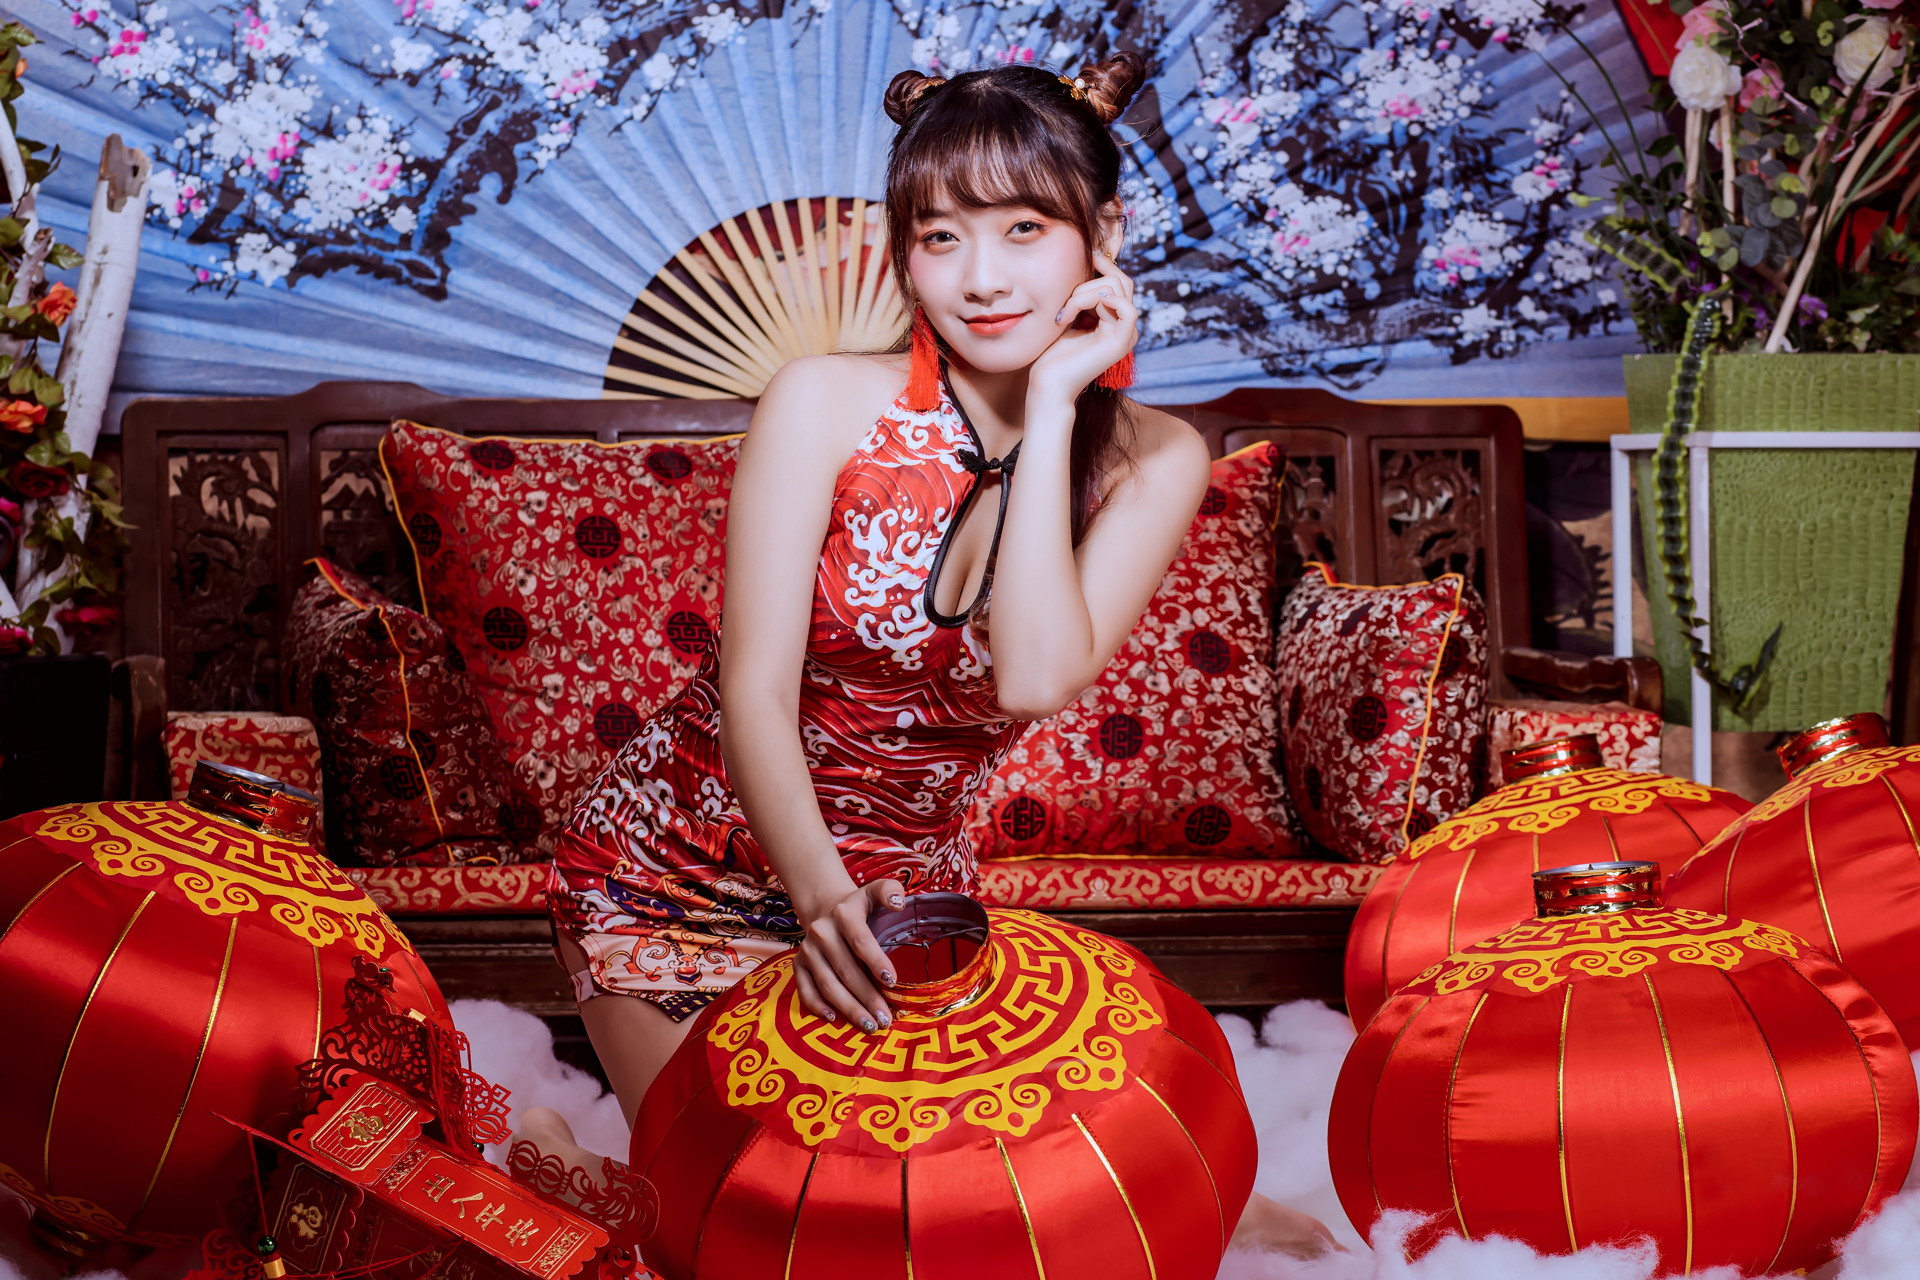 Asian Model Women Dark Hair Long Hair Pillow Chinese Lantern Traditional Clothing Couch 1920x1280